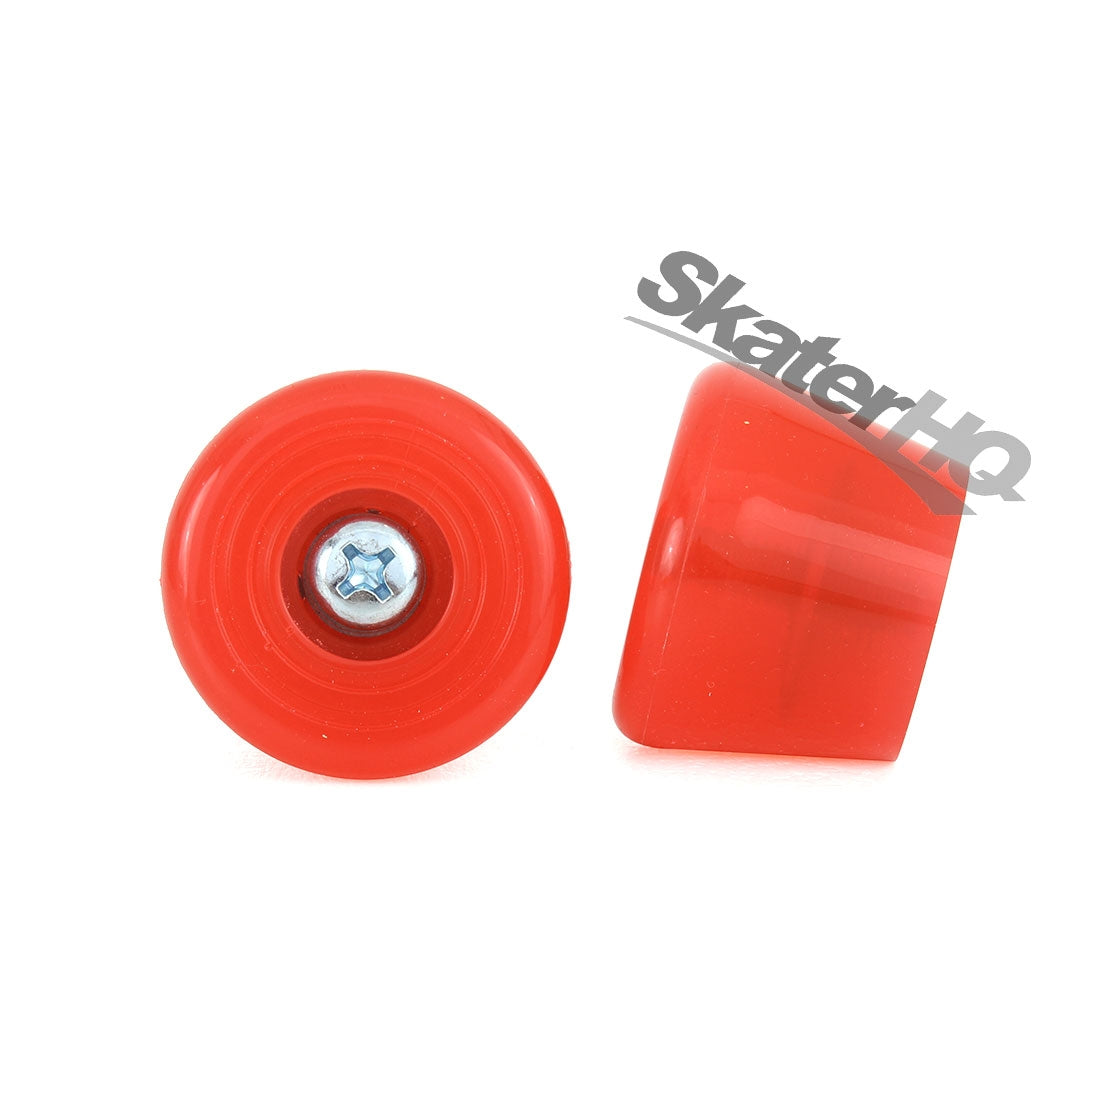 Impala Toe Stops 2pk - Clear Red Roller Skate Hardware and Parts